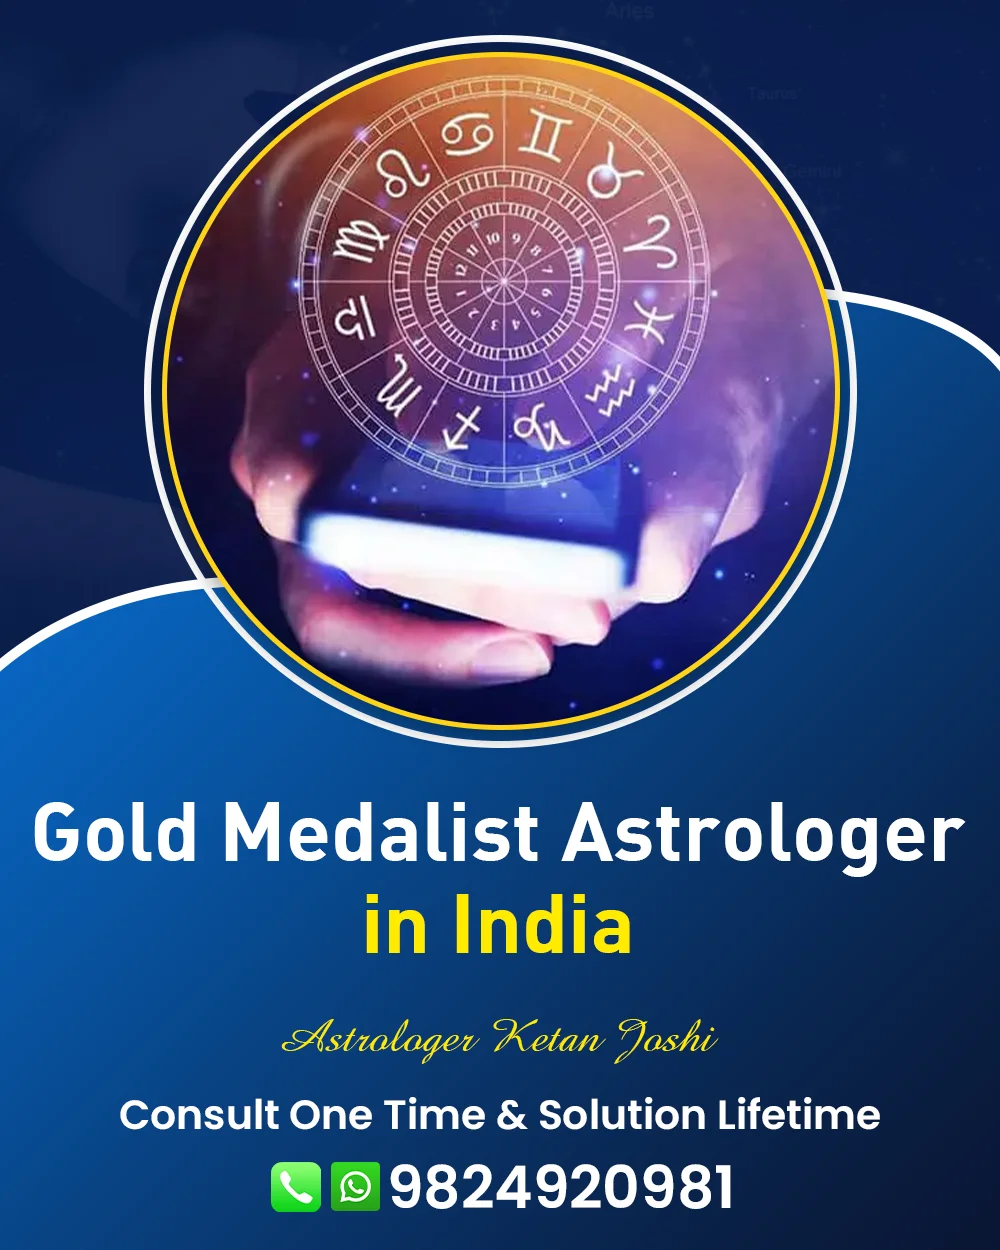 Famous Astrologer in India